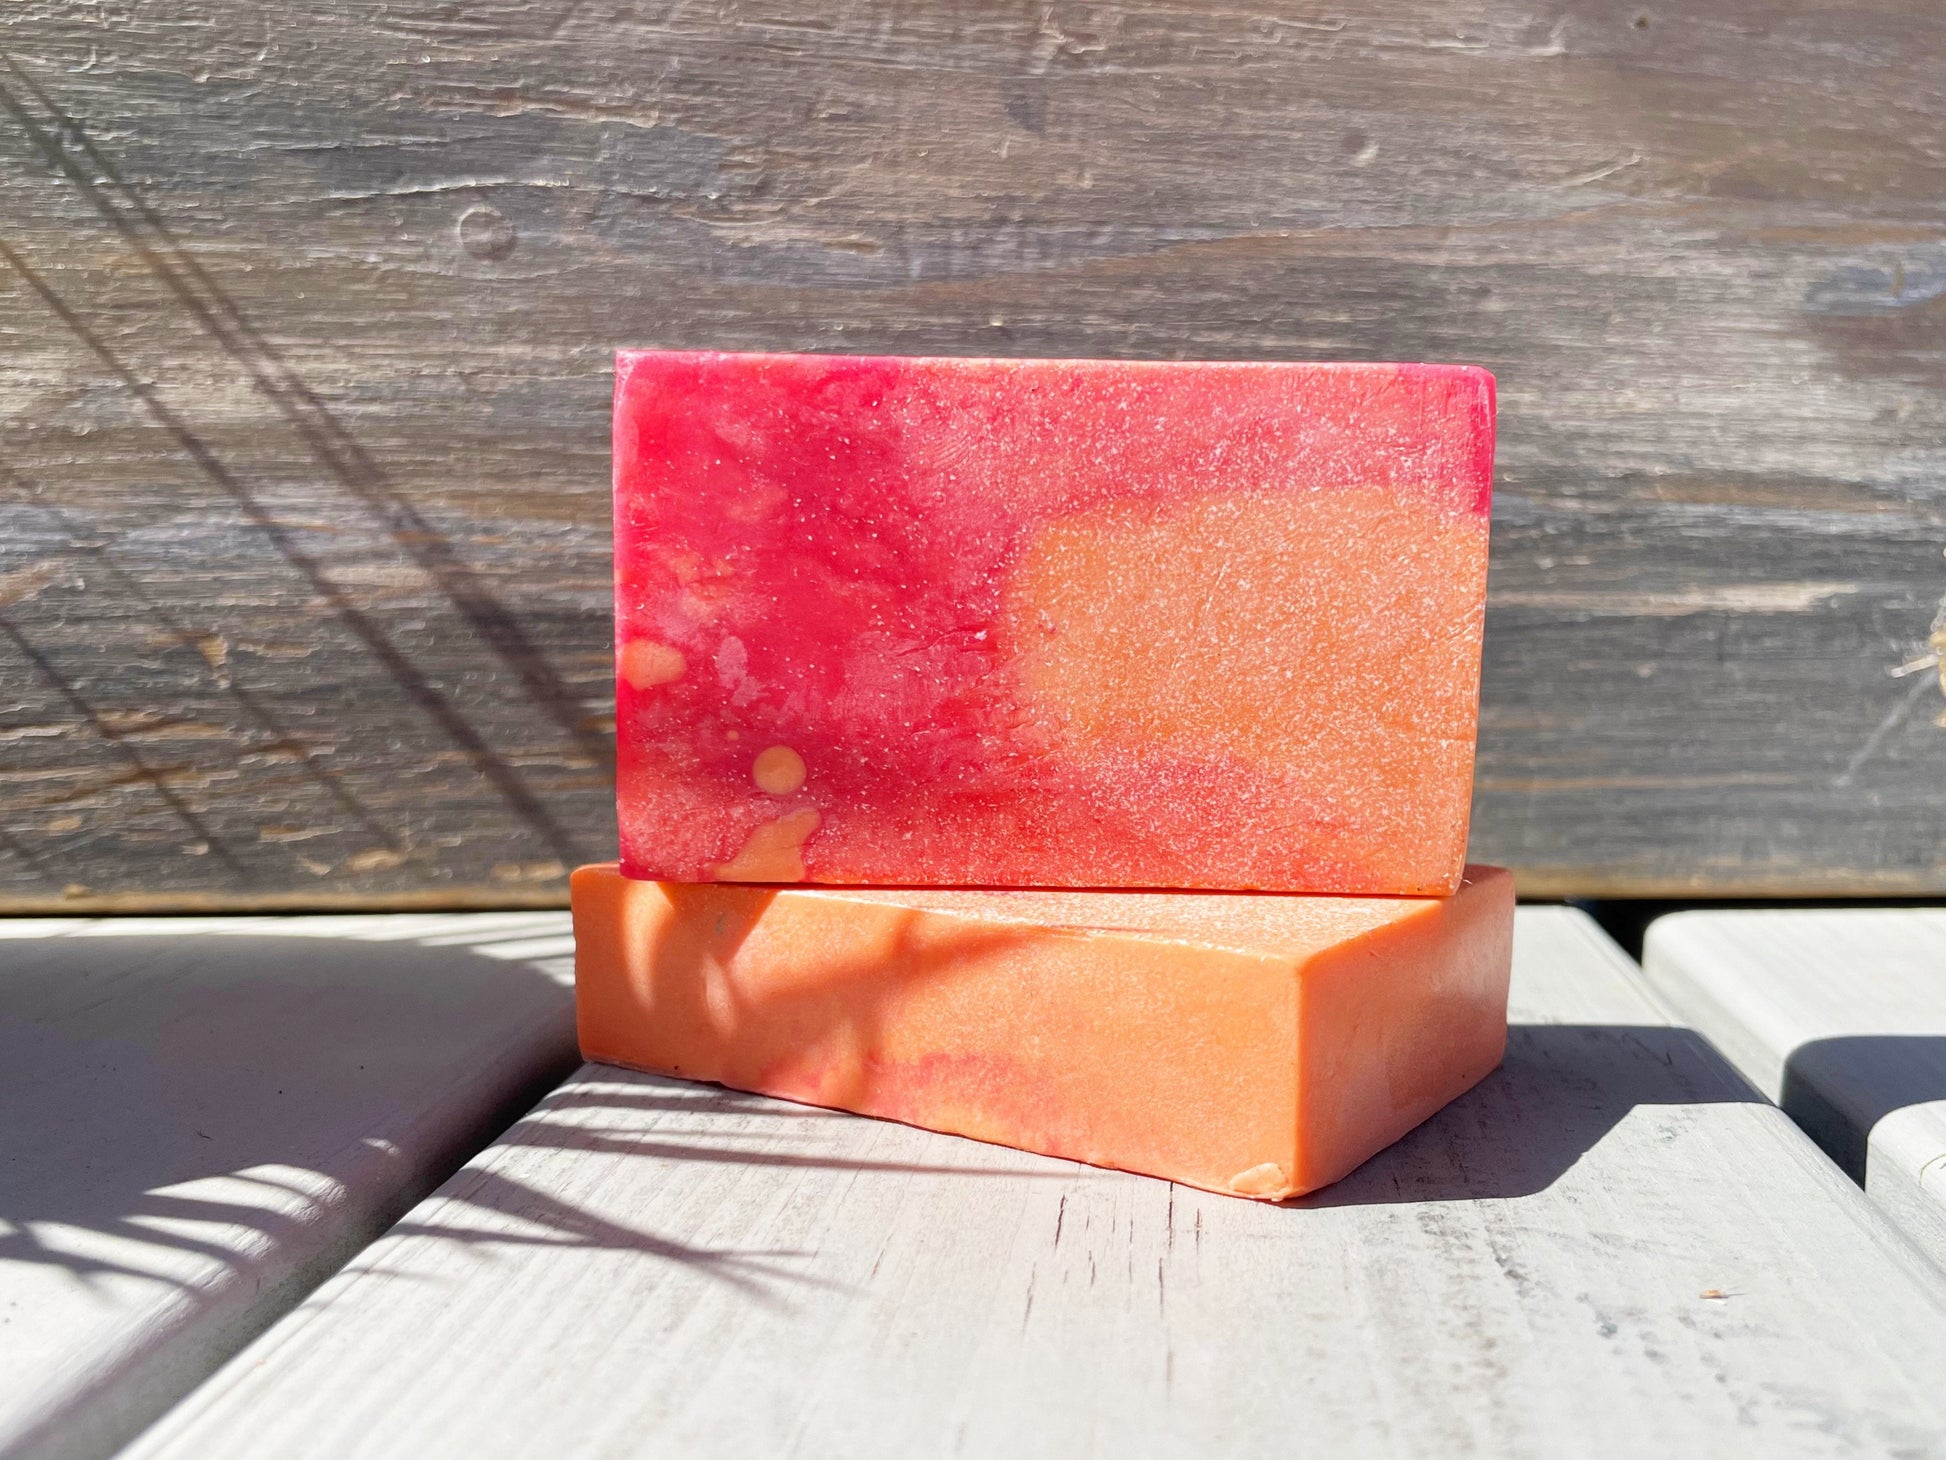 A red and orange rectangle bar soap, placed on a wooden surface.